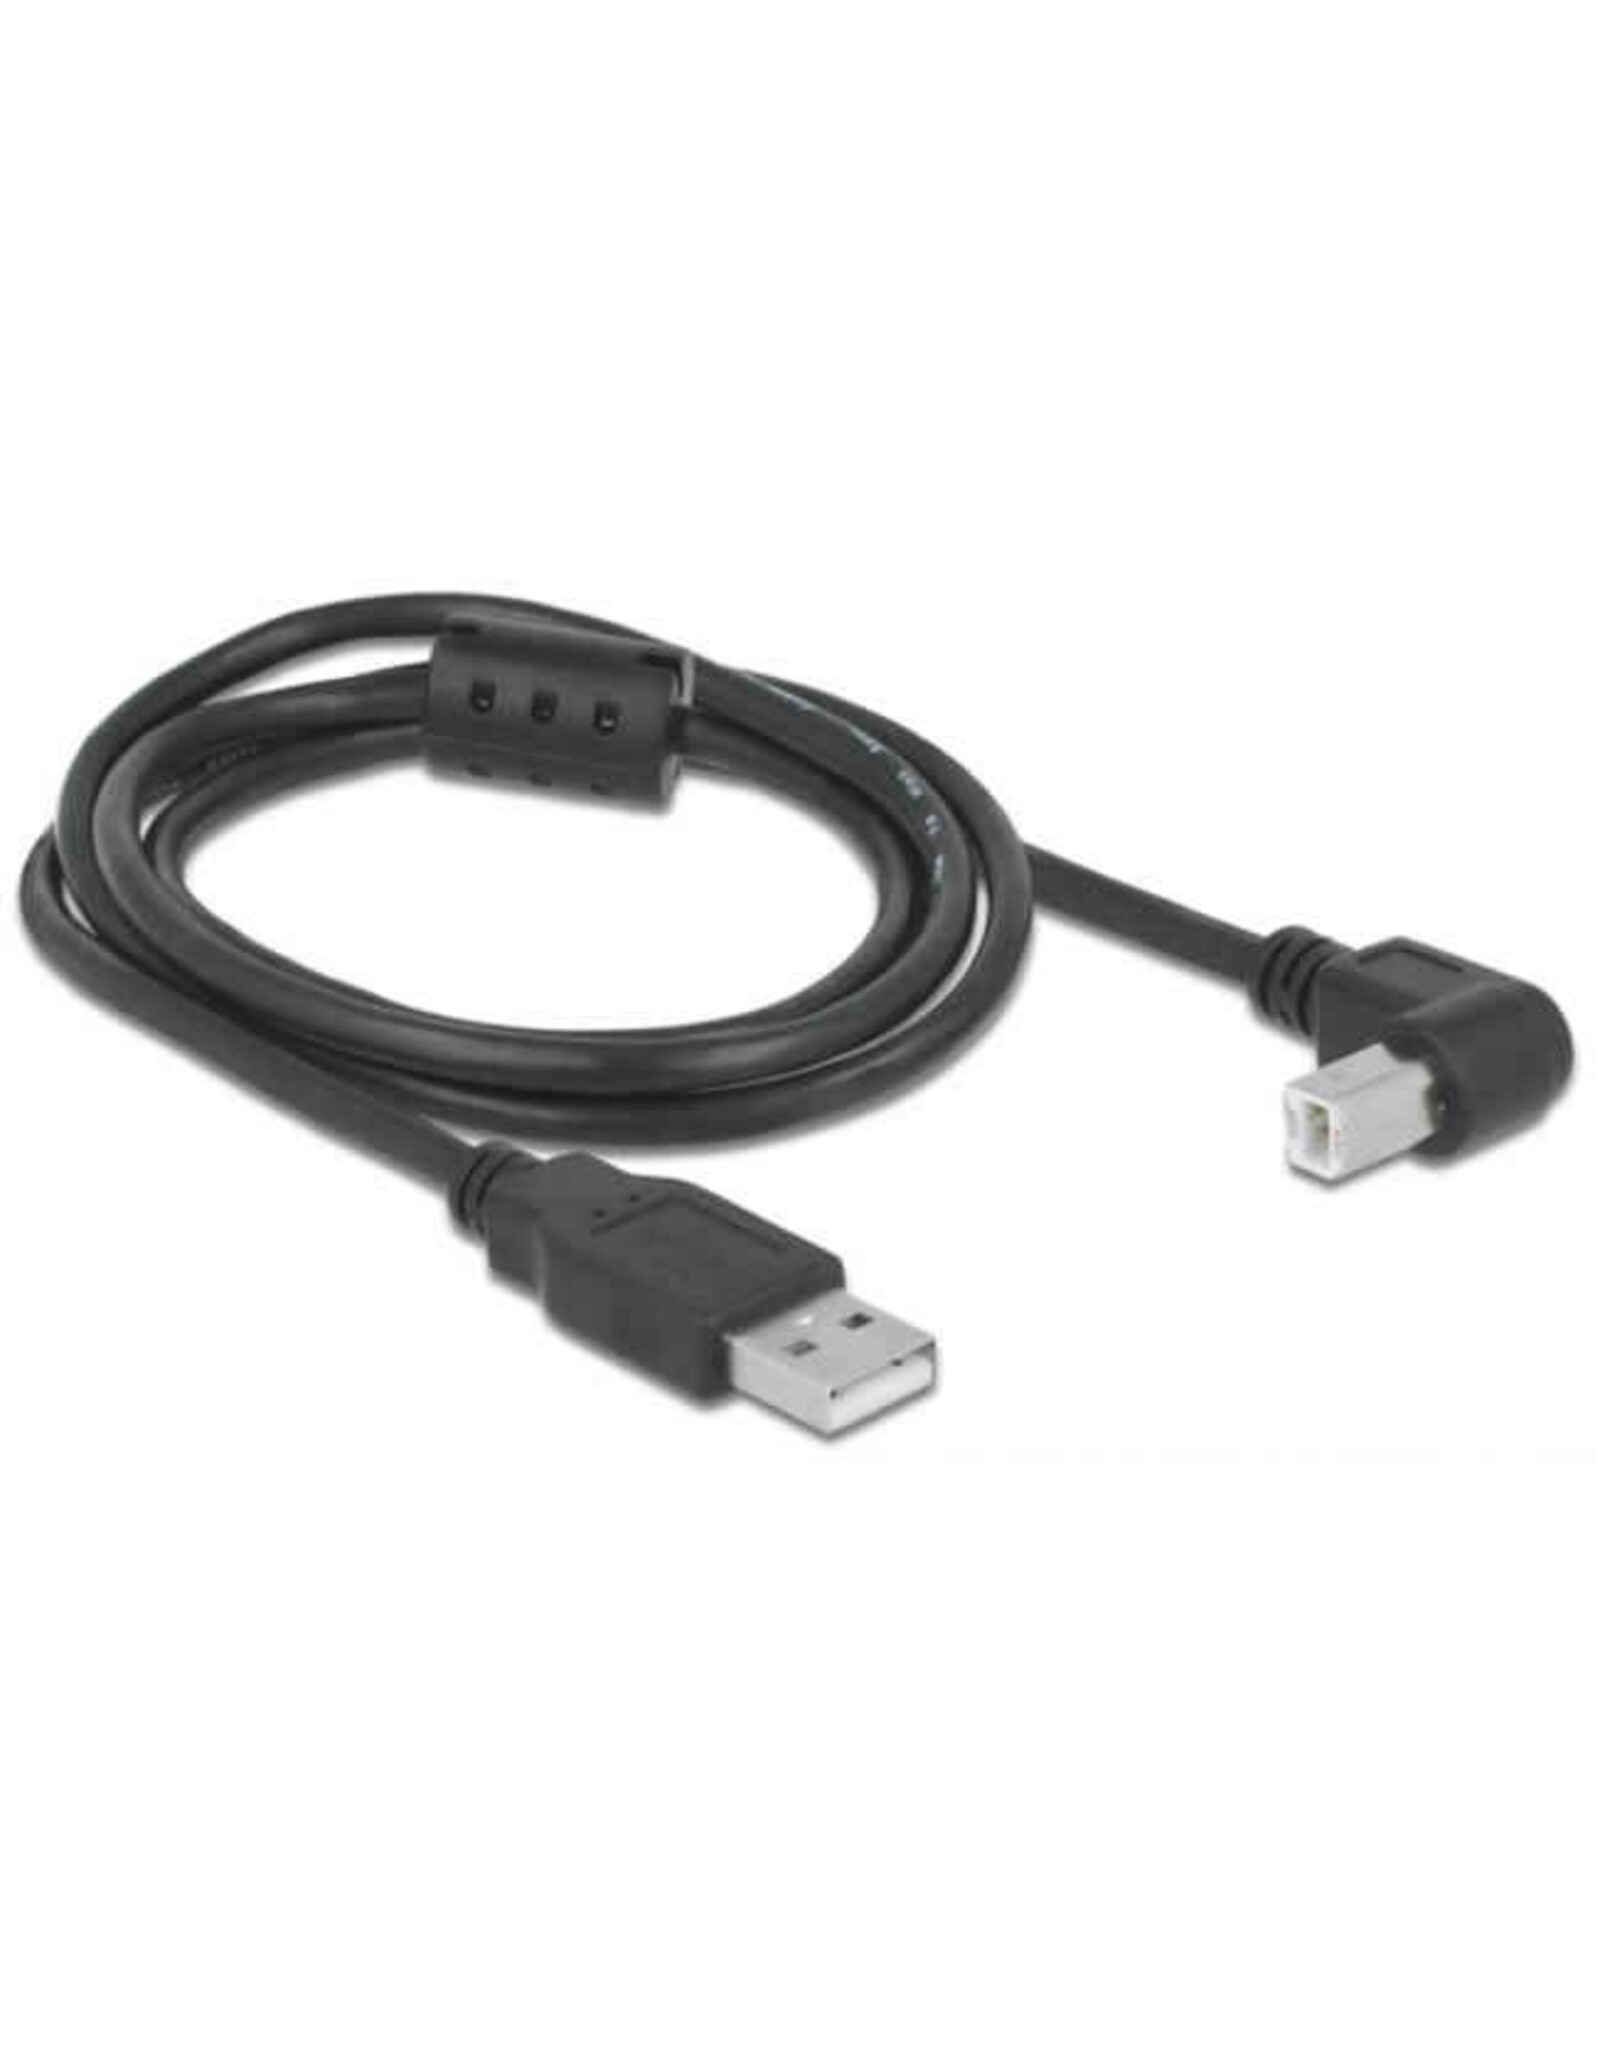 Pegasus Astro Pegasus Astro USB 2.0 Cable Type-A Male to Type-B Male Angled 1 m Black (Pack of 2 Cords)